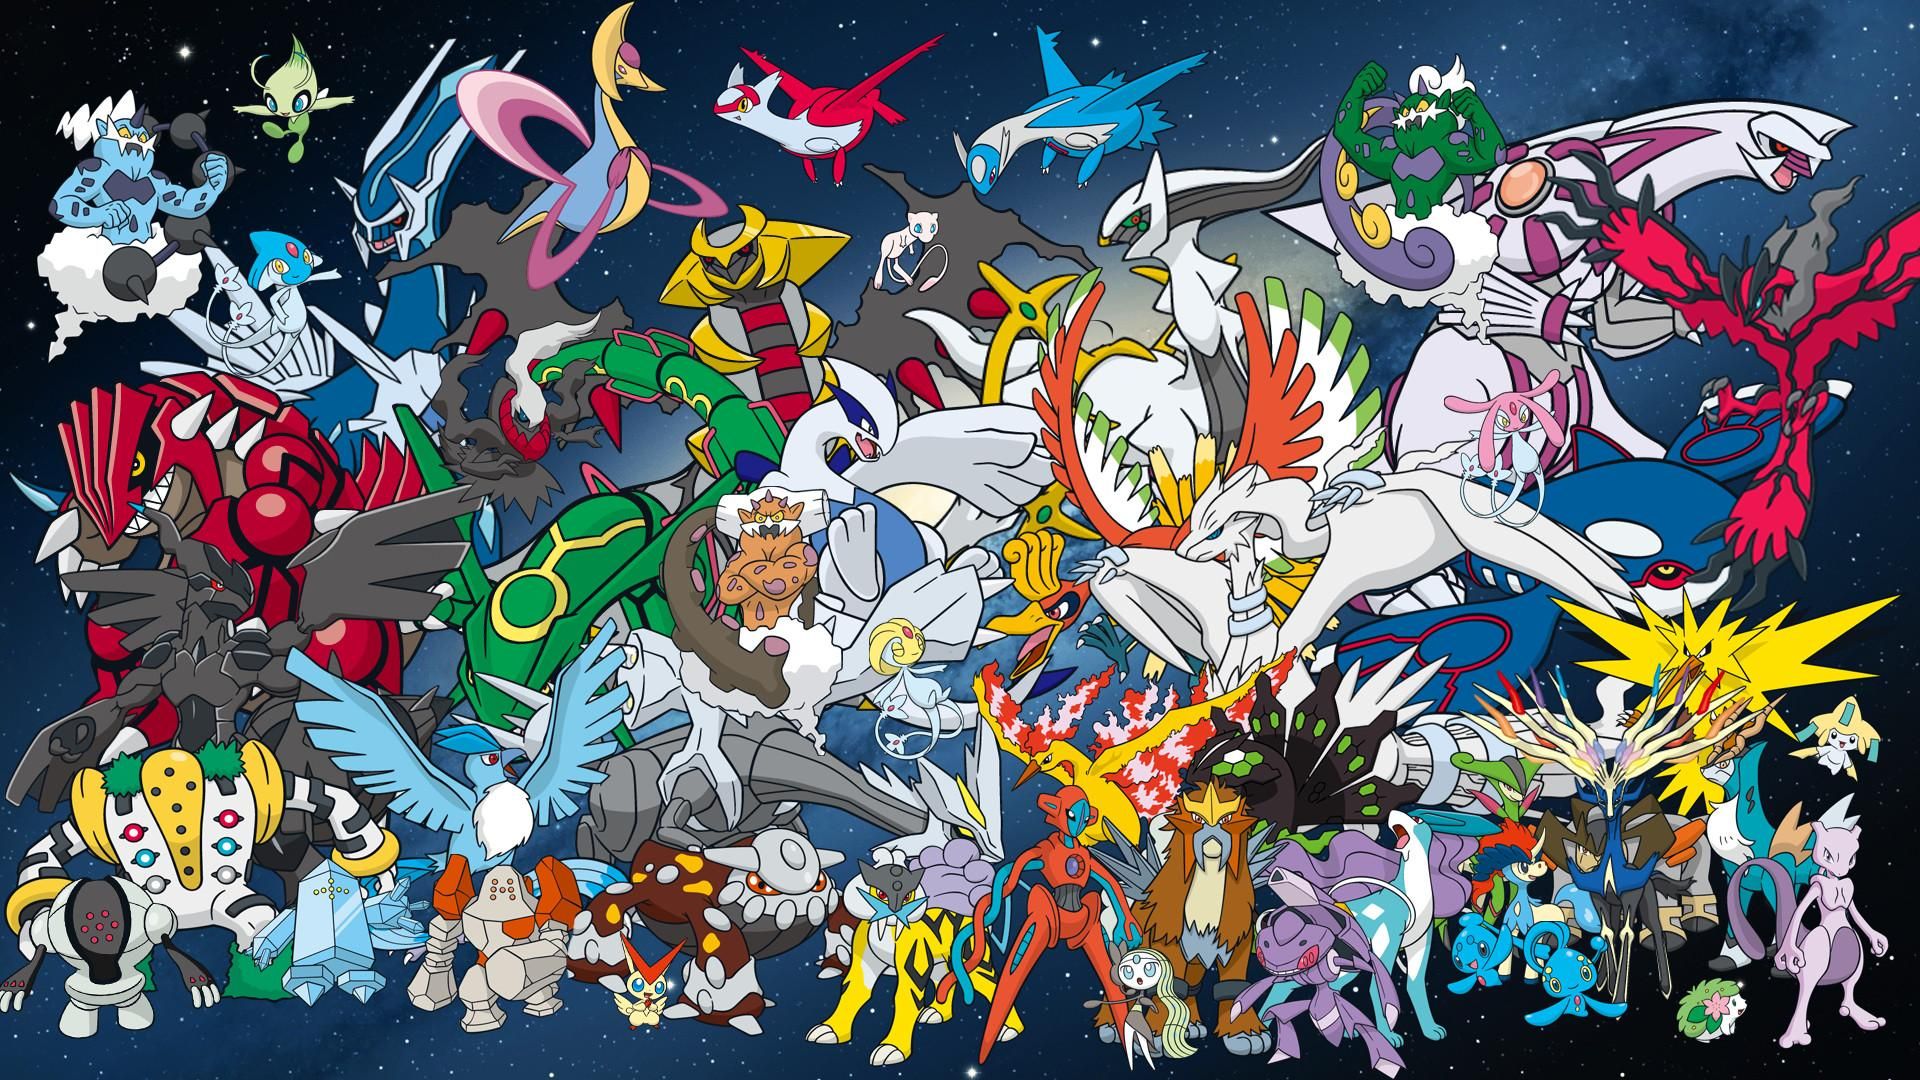 There are many starter, Legendary, and Mythical Pokémon that could get VMAX cards before Gen 9.